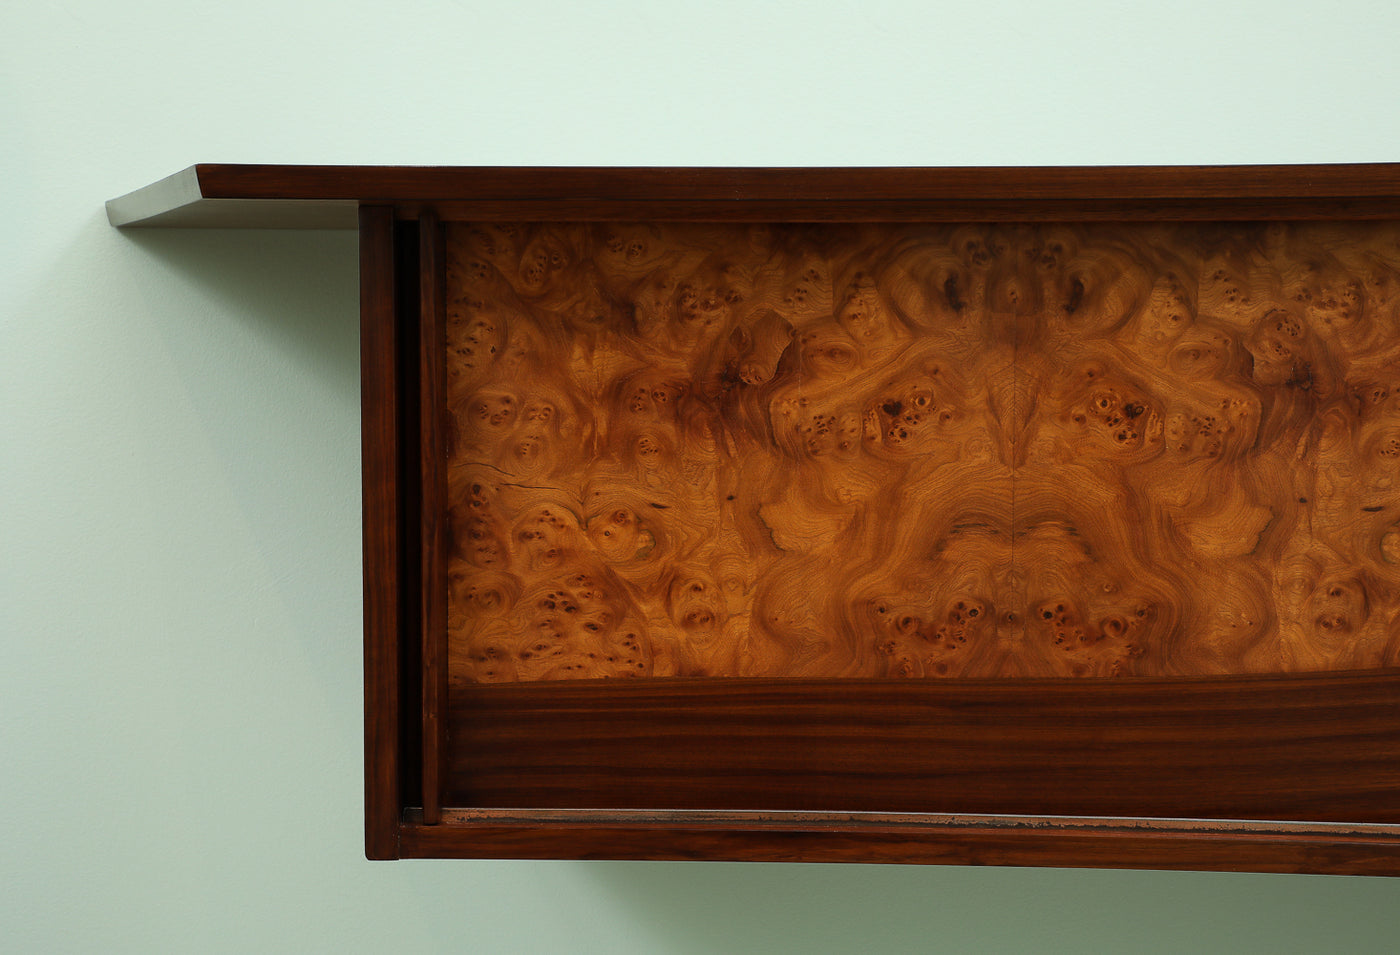 No. 249 Wall Mounted Console by George Nakashima for Widdicomb